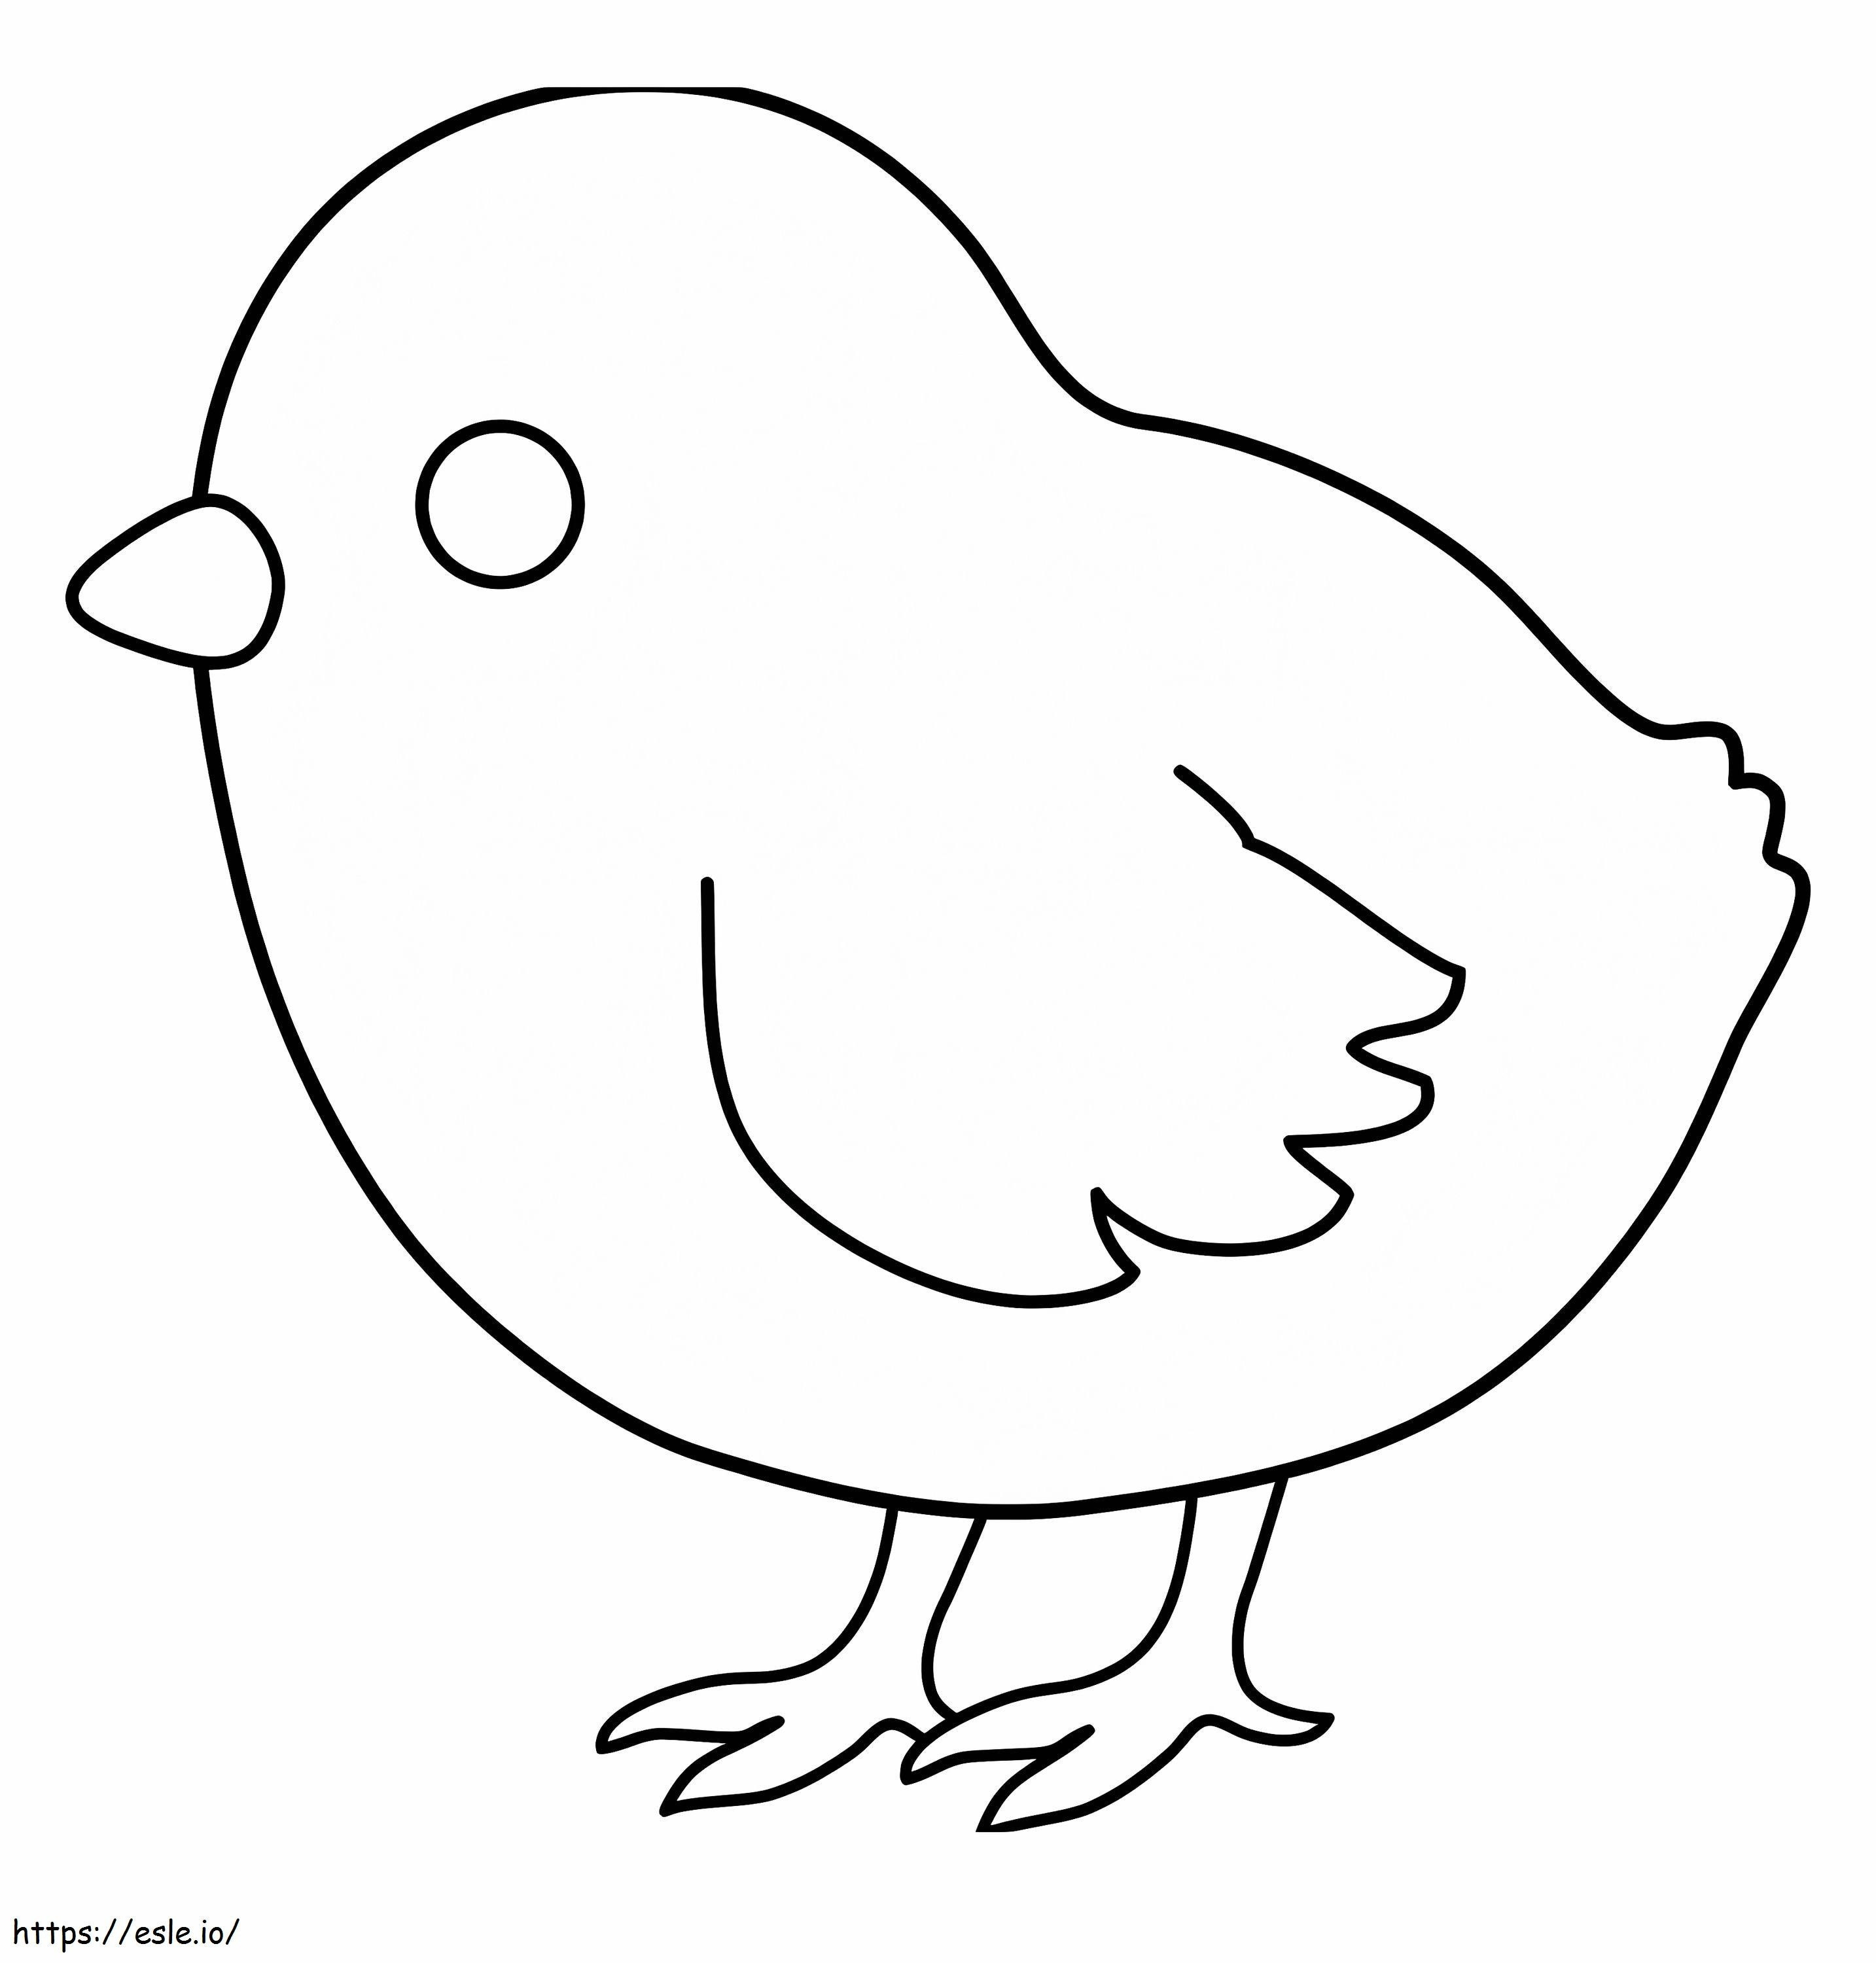 Simple Chick coloring page